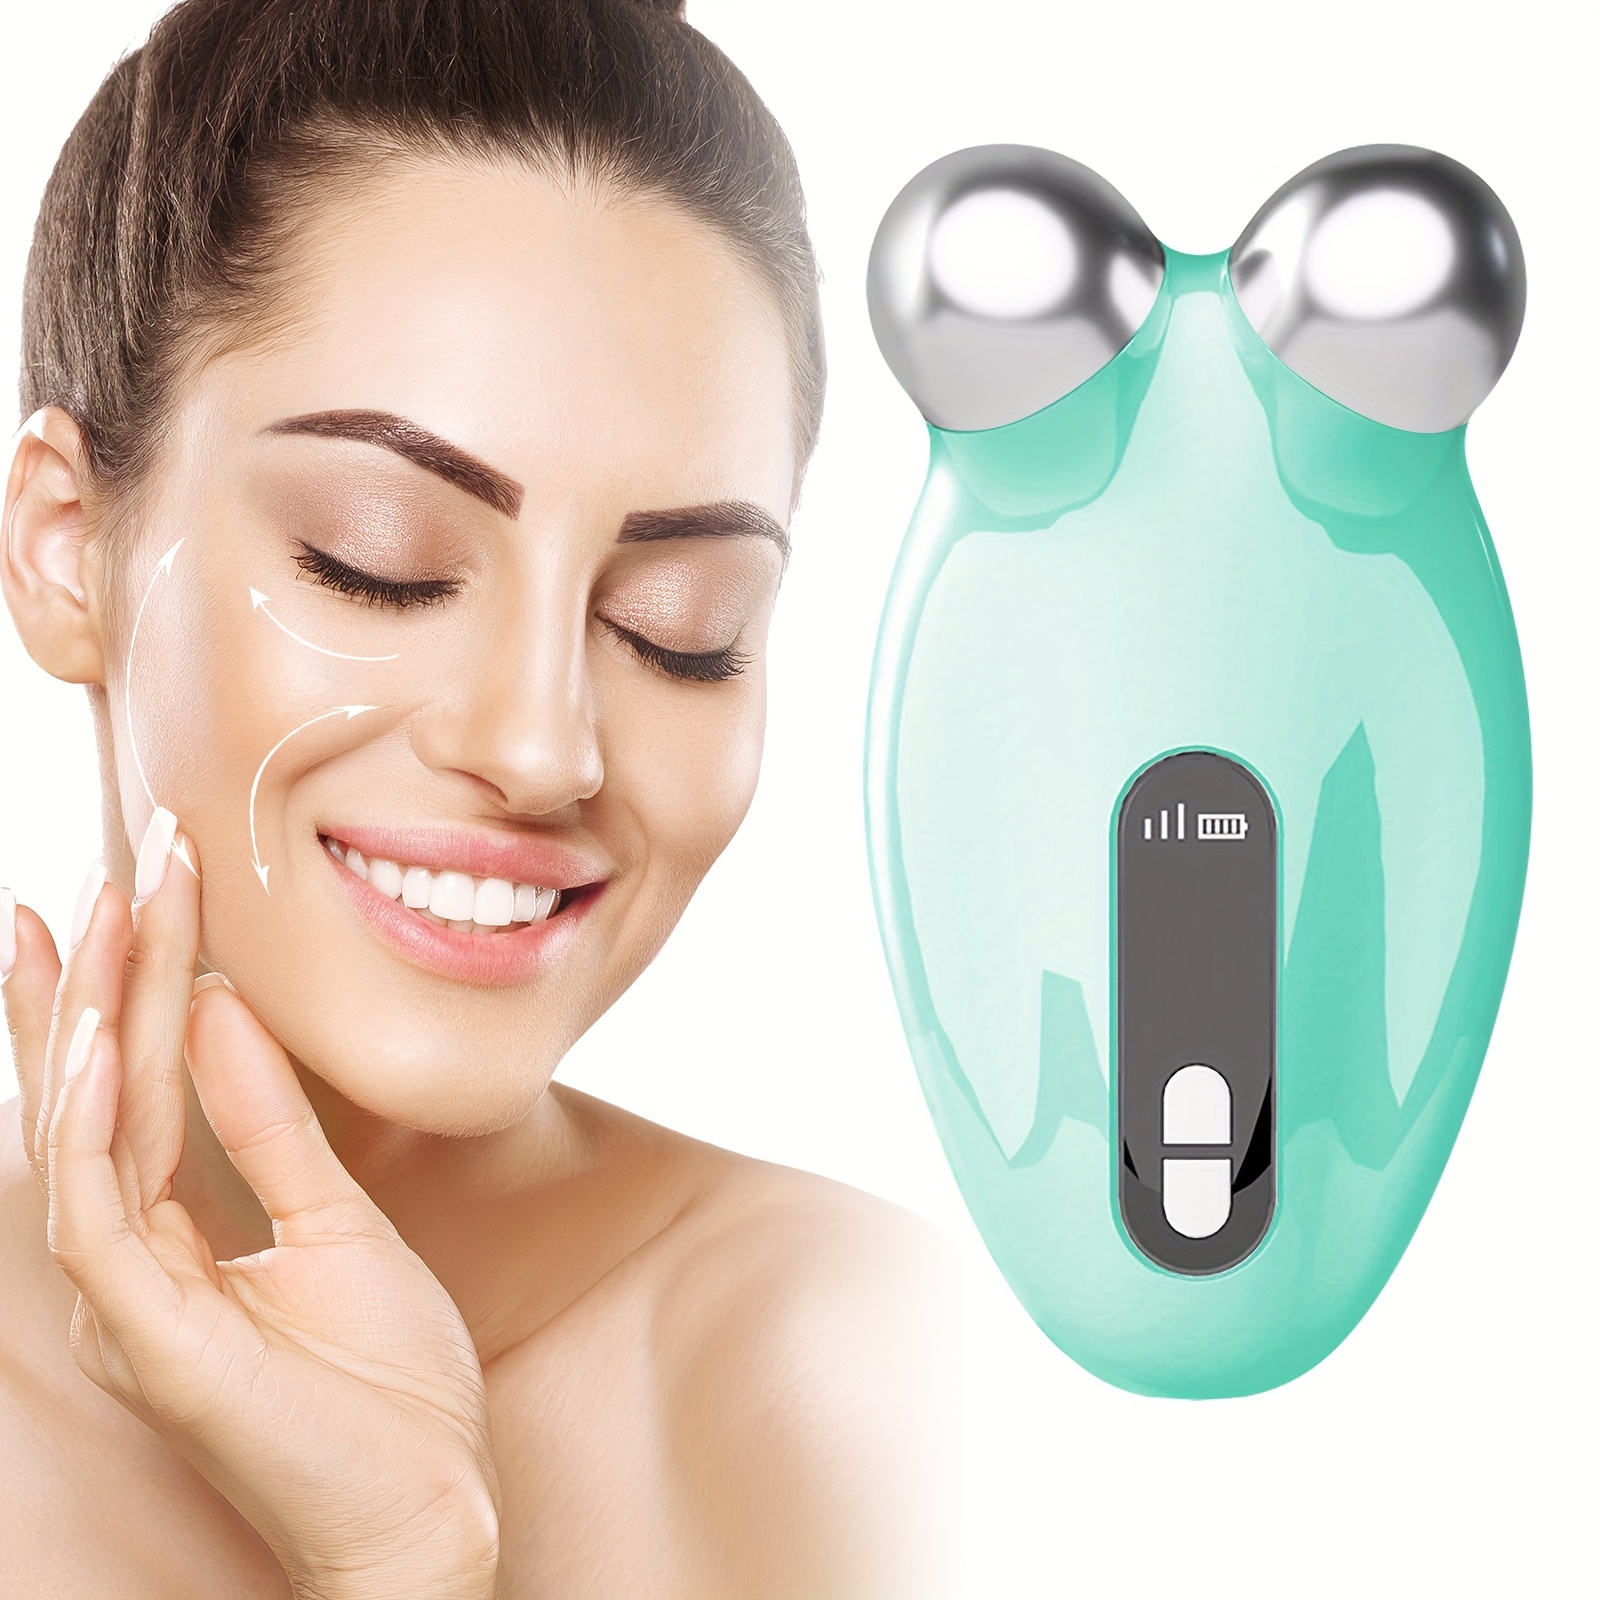 

New Neck Face Beauty Device, Skin Care Face Massage, 3 In 1 Facial Massager, Neck & Face Skin Tightening Massager, Skincare Tool For Contouring And Smoothing, Portable Face Lift Massage Equipment